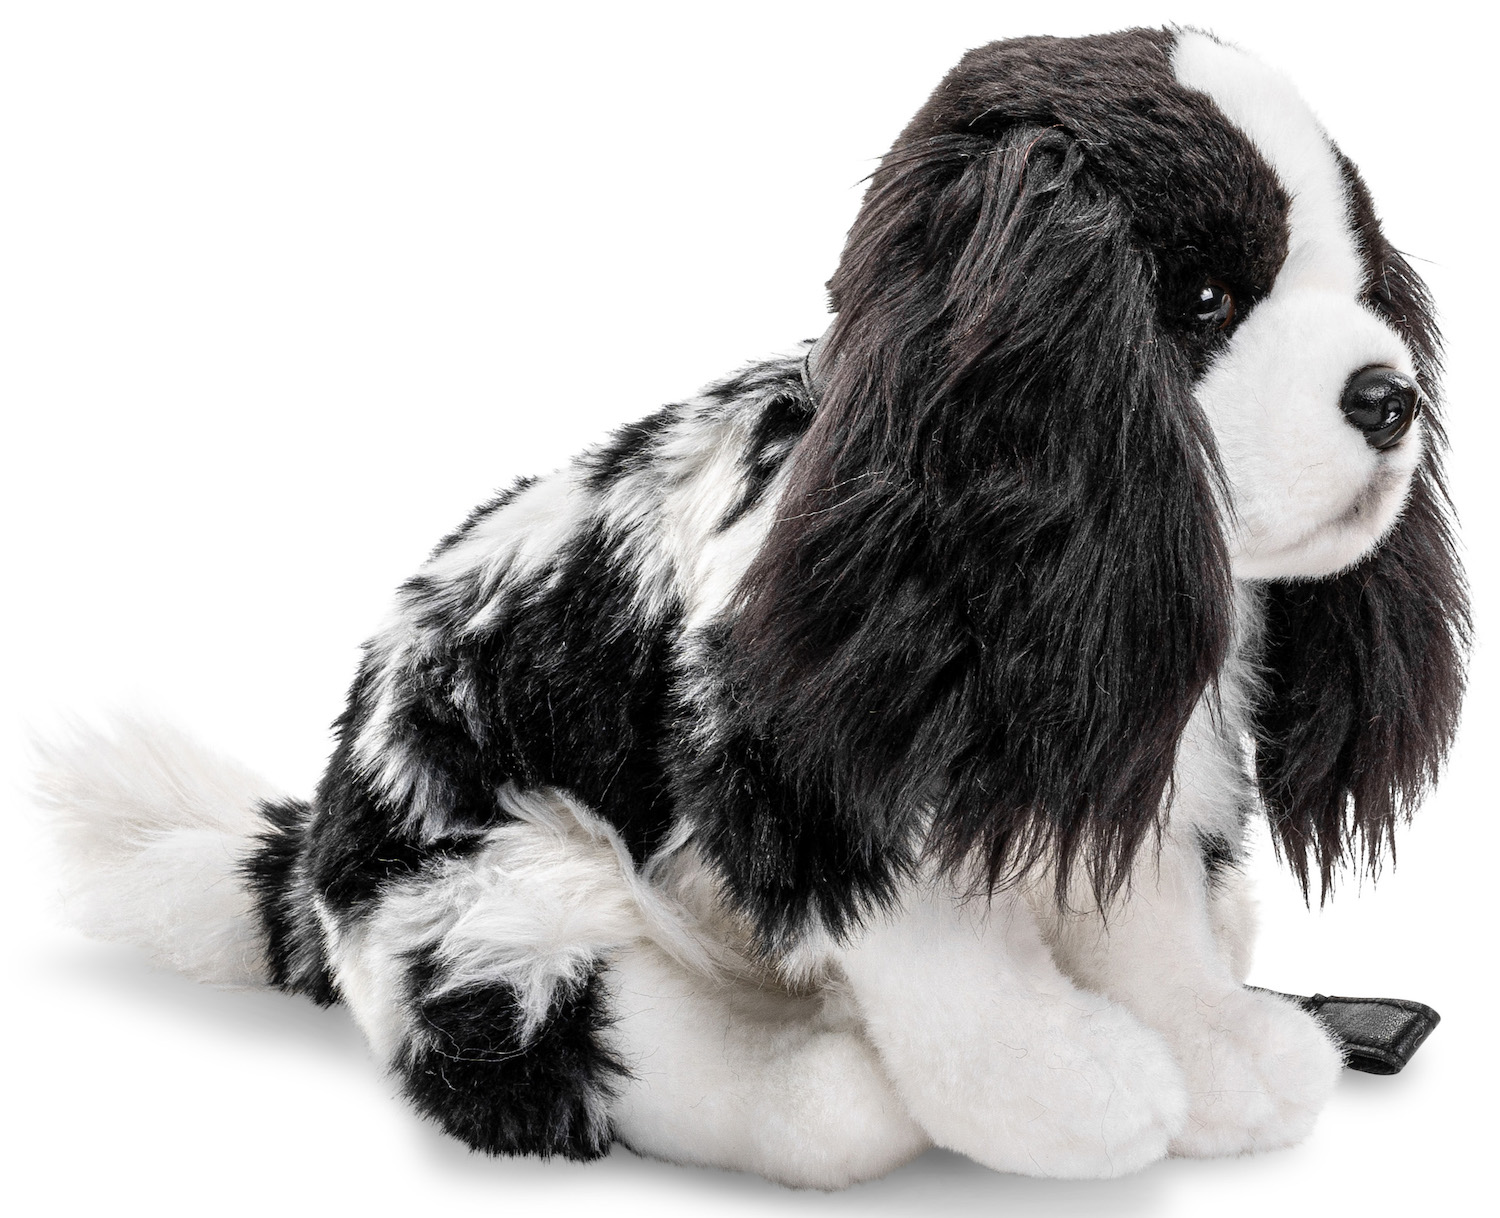 Uni-Toys - cocker spaniel black and white, sitting - With collar and leash - 23 cm (height) - Plush dog - Plush toy, cuddly toy